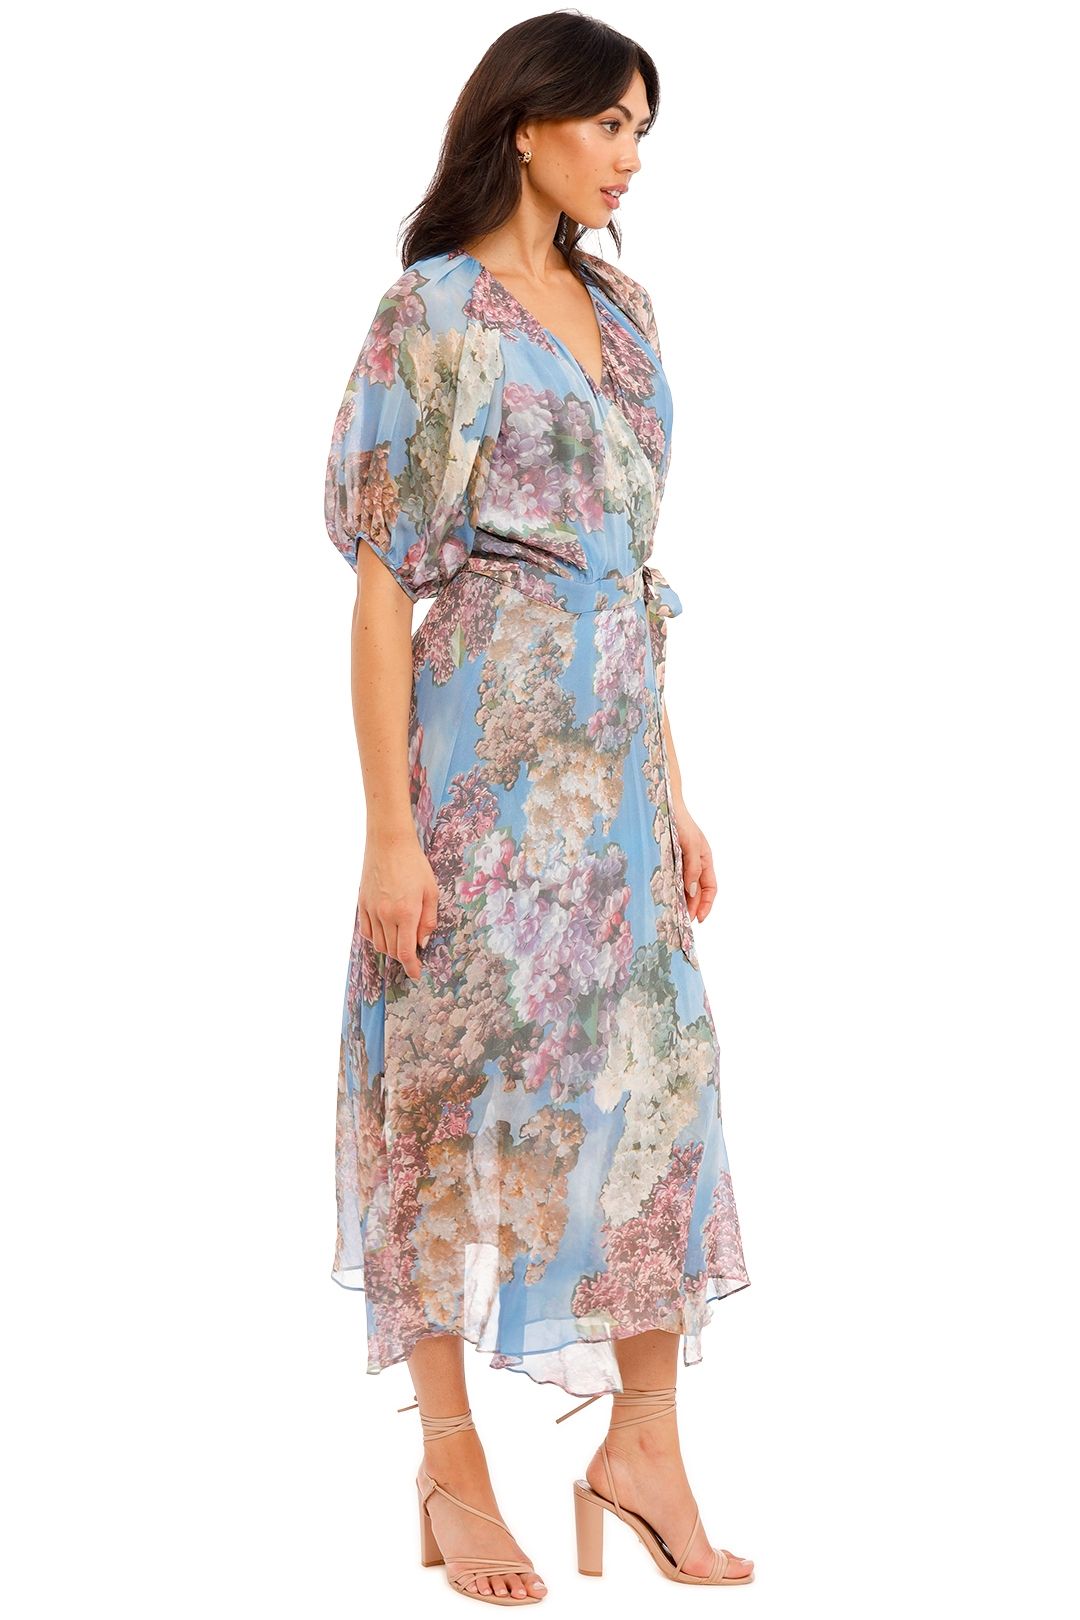 Ginger and Smart New Romantic Wrap Dress print